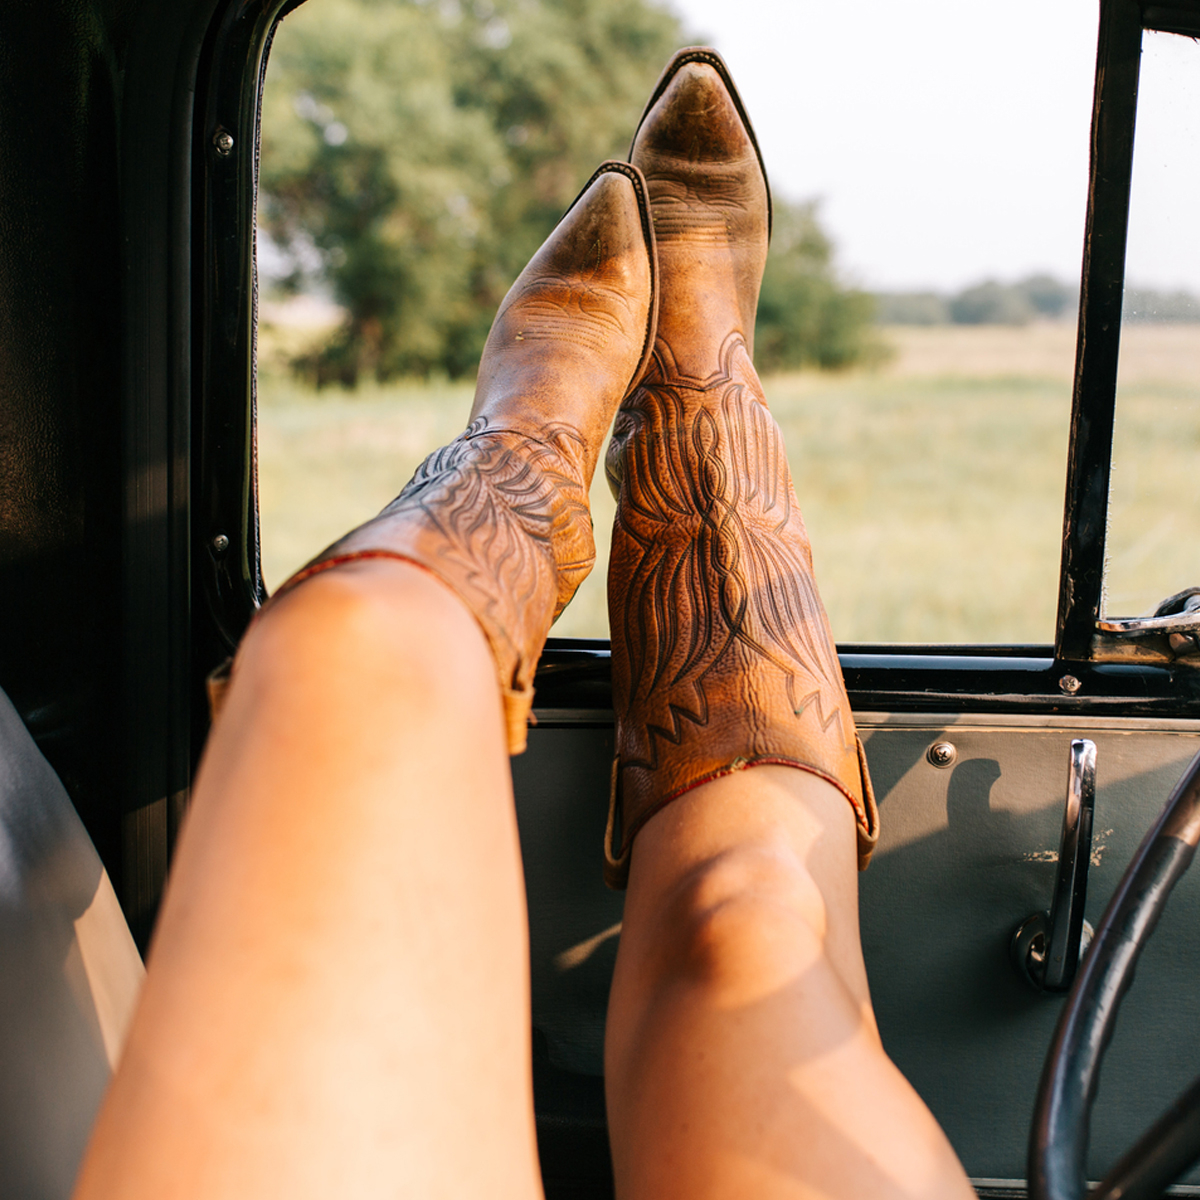 We Rounded up 20 Cowboy Boots Under $150